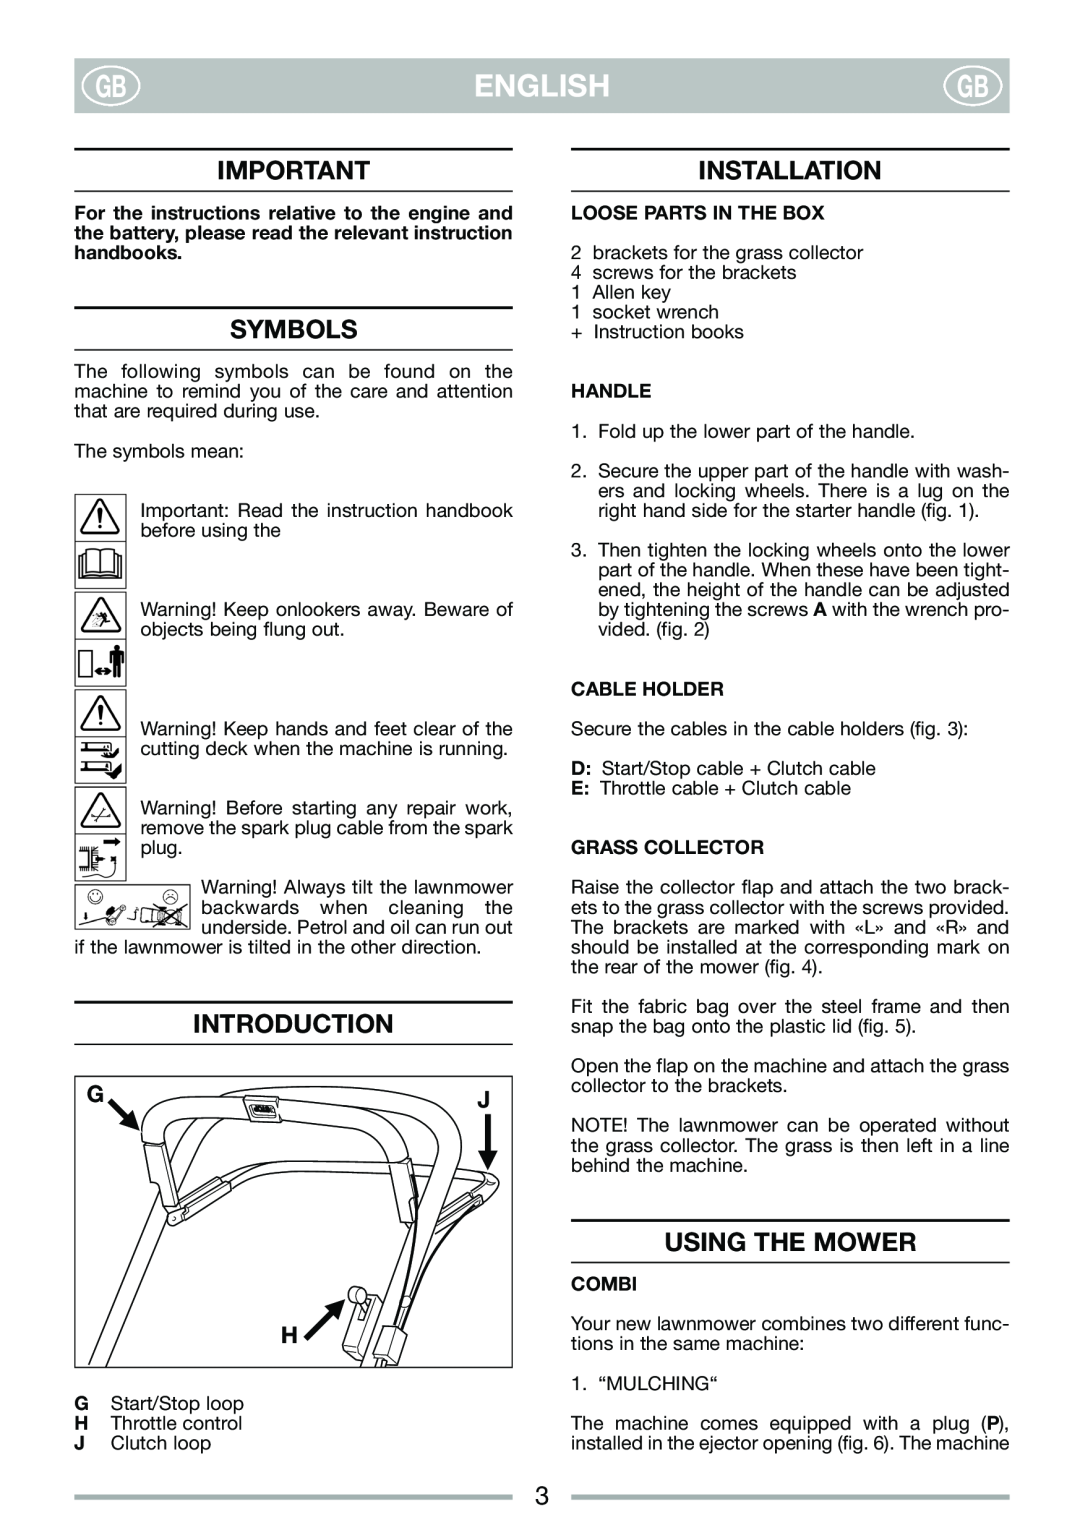 Mountfield 550 SP owner manual Symbols, Introduction, Installation, Using The Mower, English 